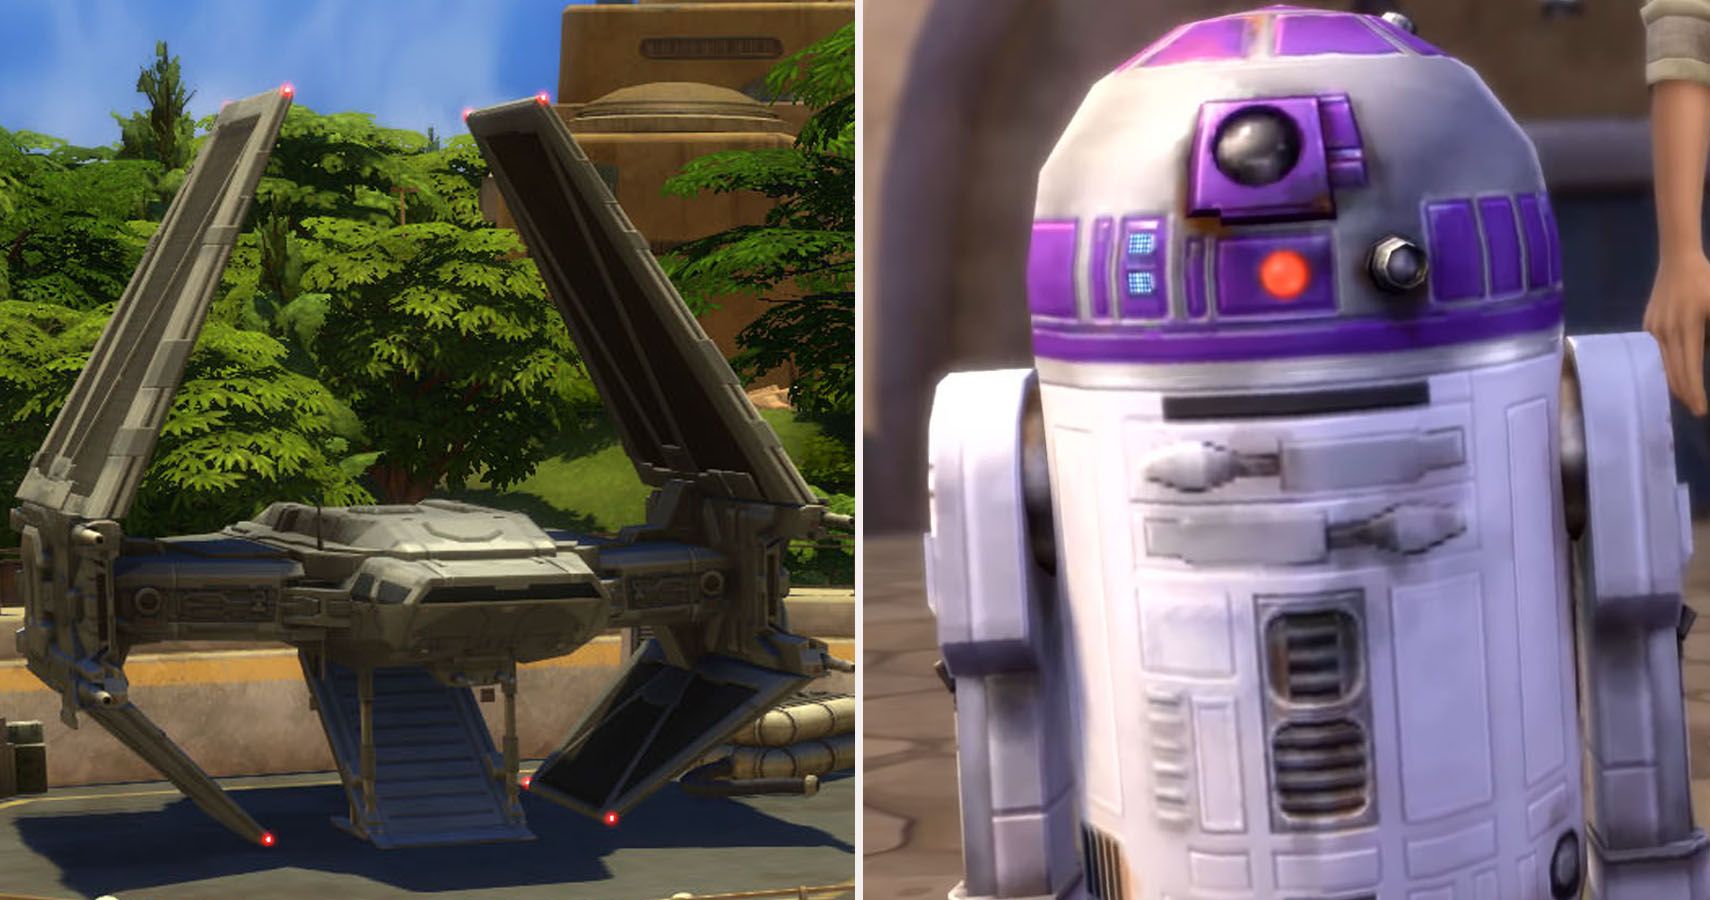 Split Image left side T.I.E. Fighter, right side droid. Both in Sims 4.